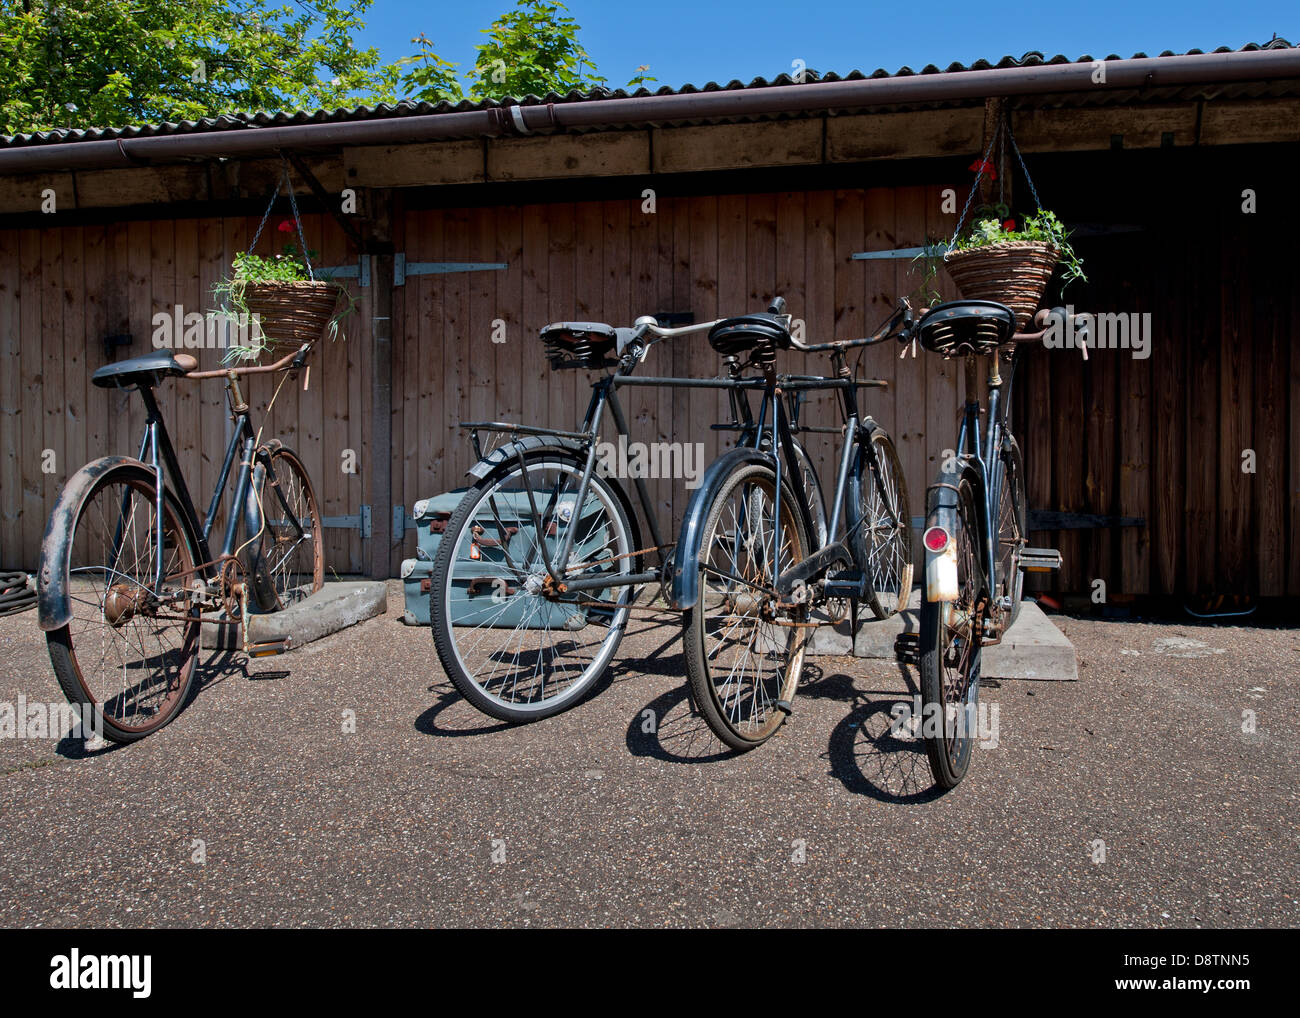 Vintage push bicycles on old fashioned concrete bike stands Stock Photo